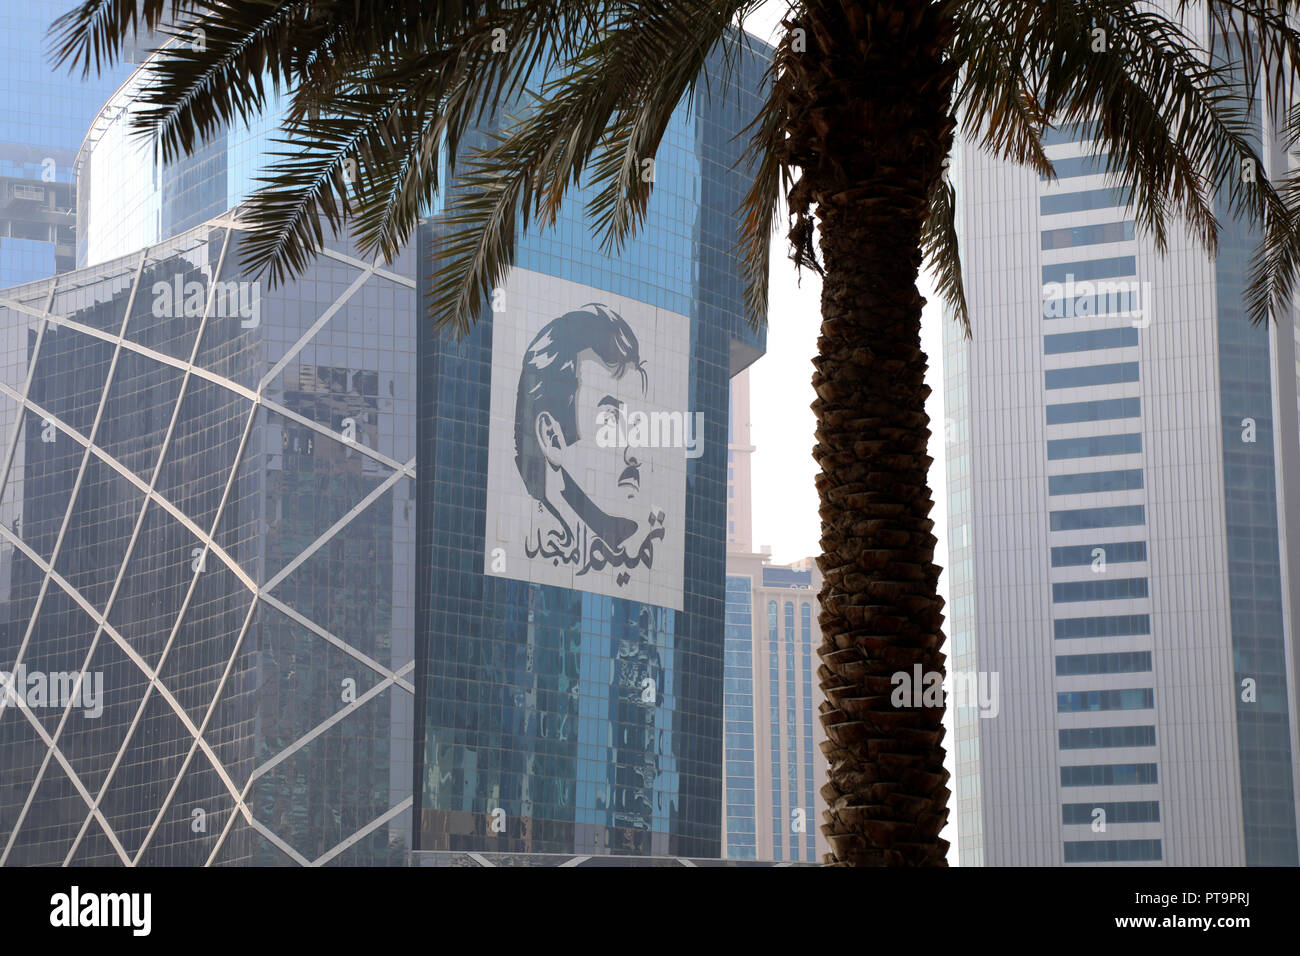 Doha / Qatar – October 8, 2018: A styalised image of Sheikh Tamim bin Hamad al Thani created by Ahmed Almaadheed on the side of a building in central Doha Stock Photo